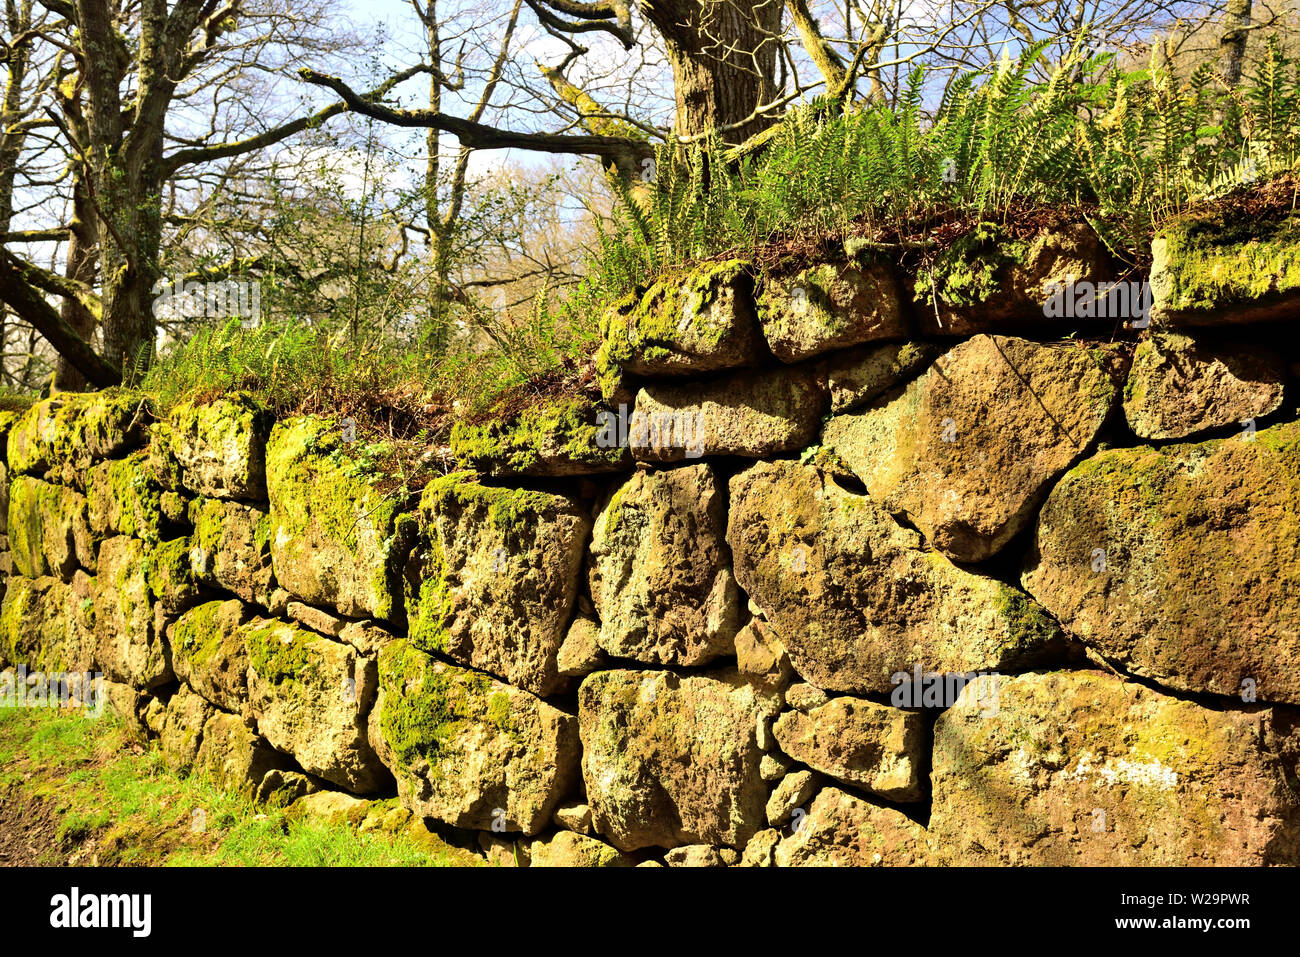 Ferns and moss growing on a dry stone wall. Stock Photo